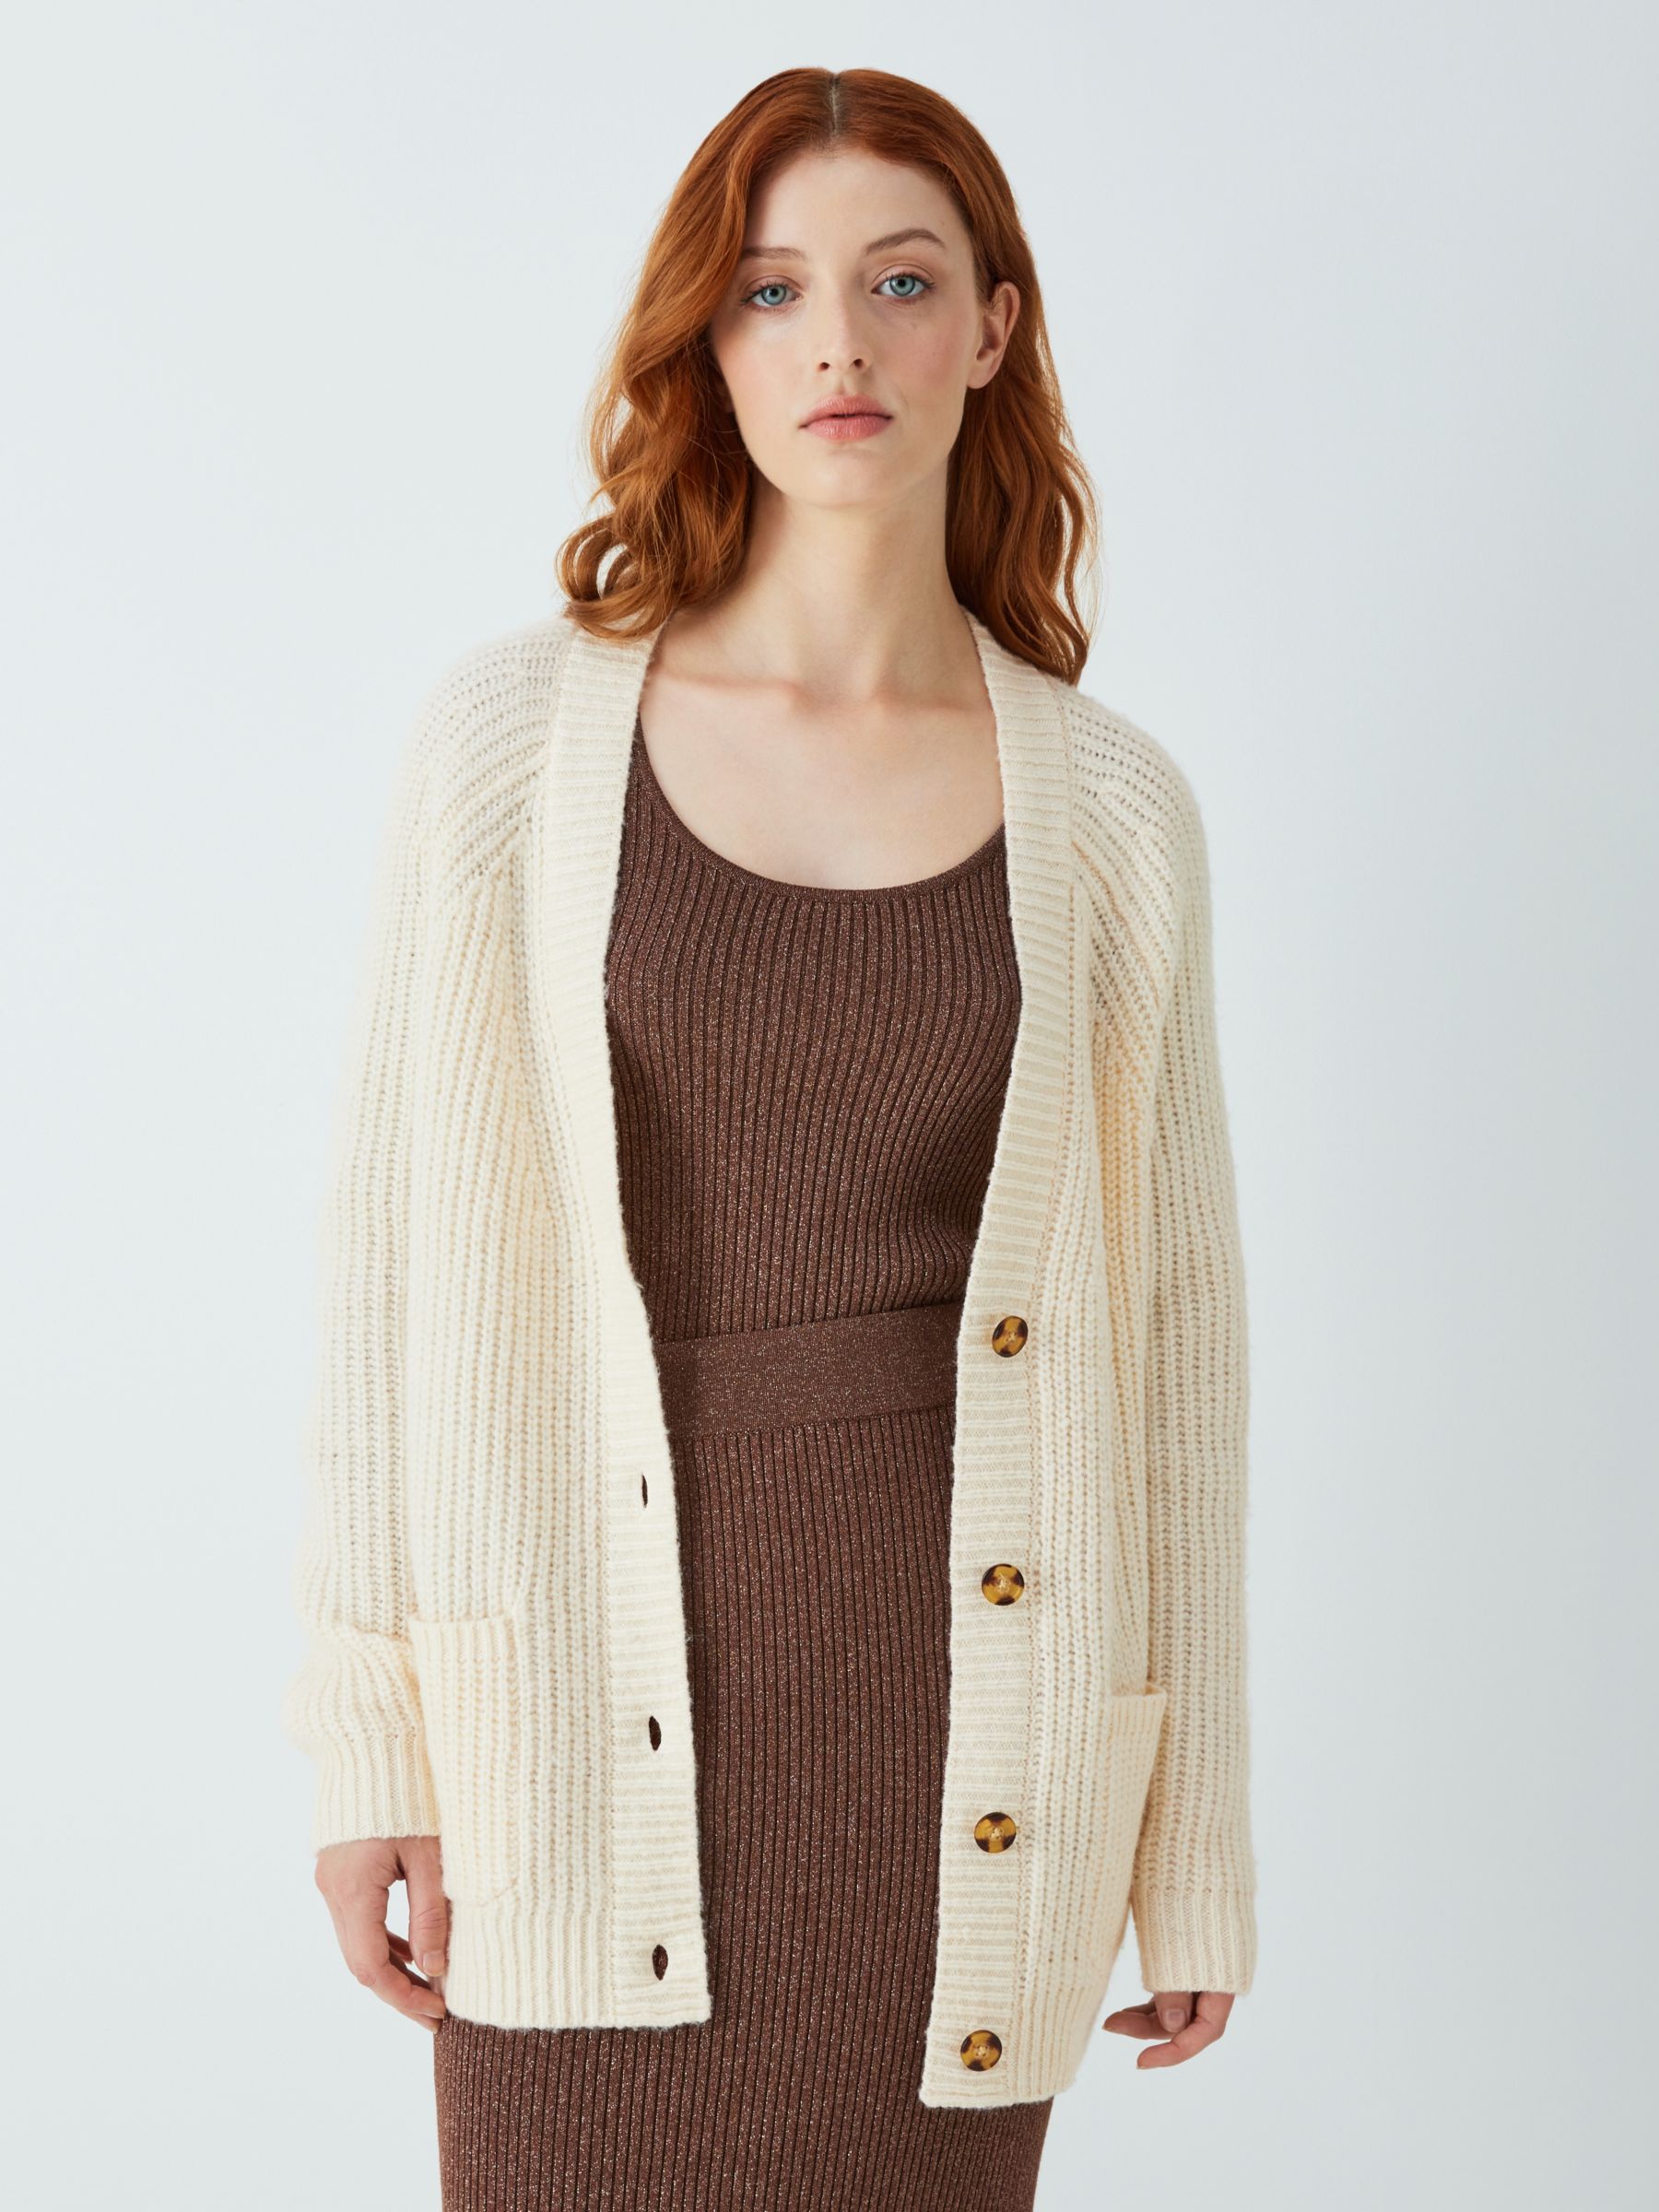 Textured Sweater Jacket  Petite sweaters, Textured sweater